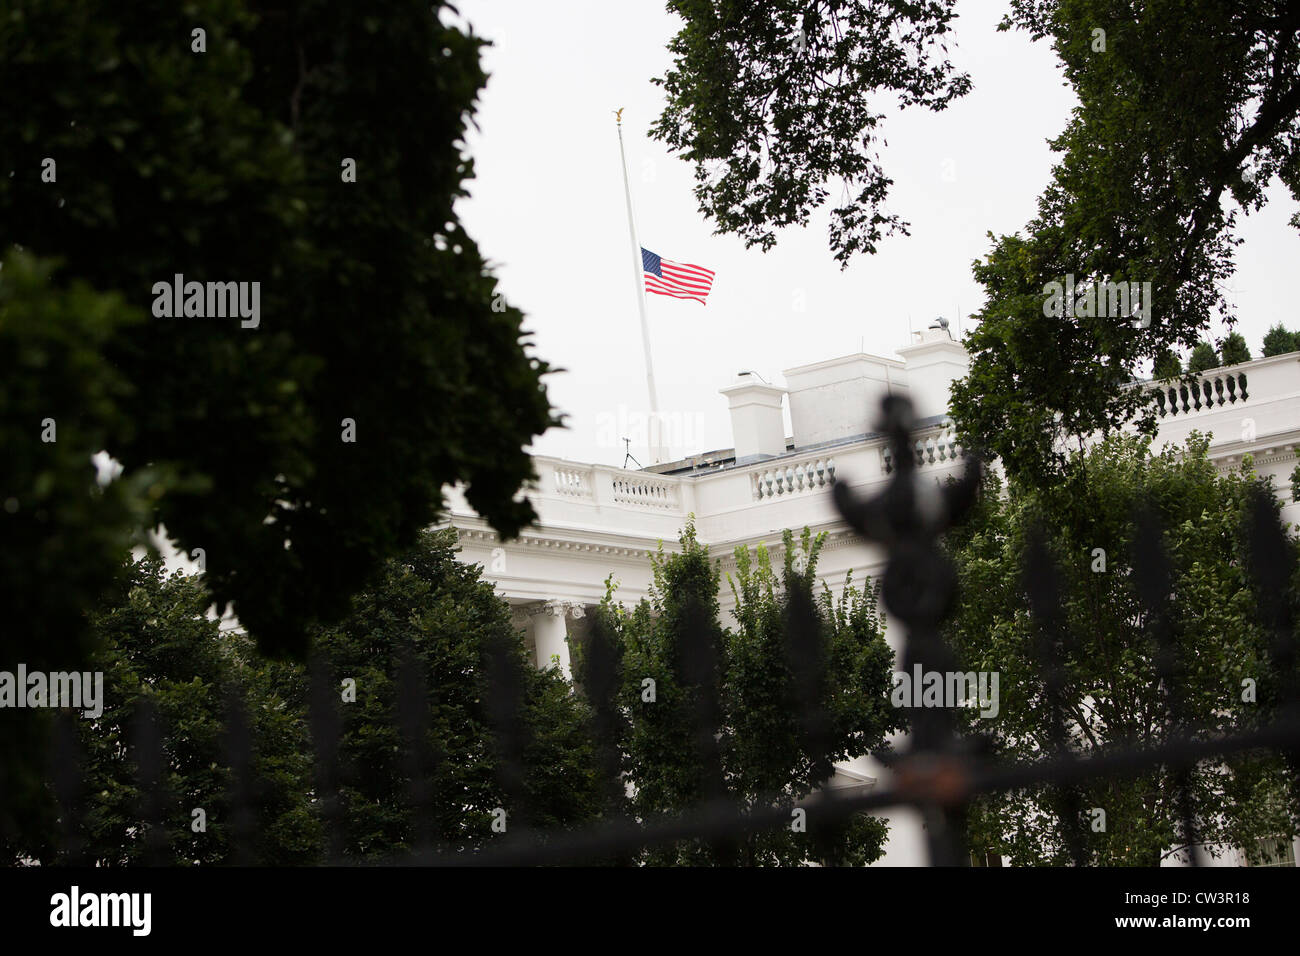 The White House with its flag lowered to half mast. Stock Photo